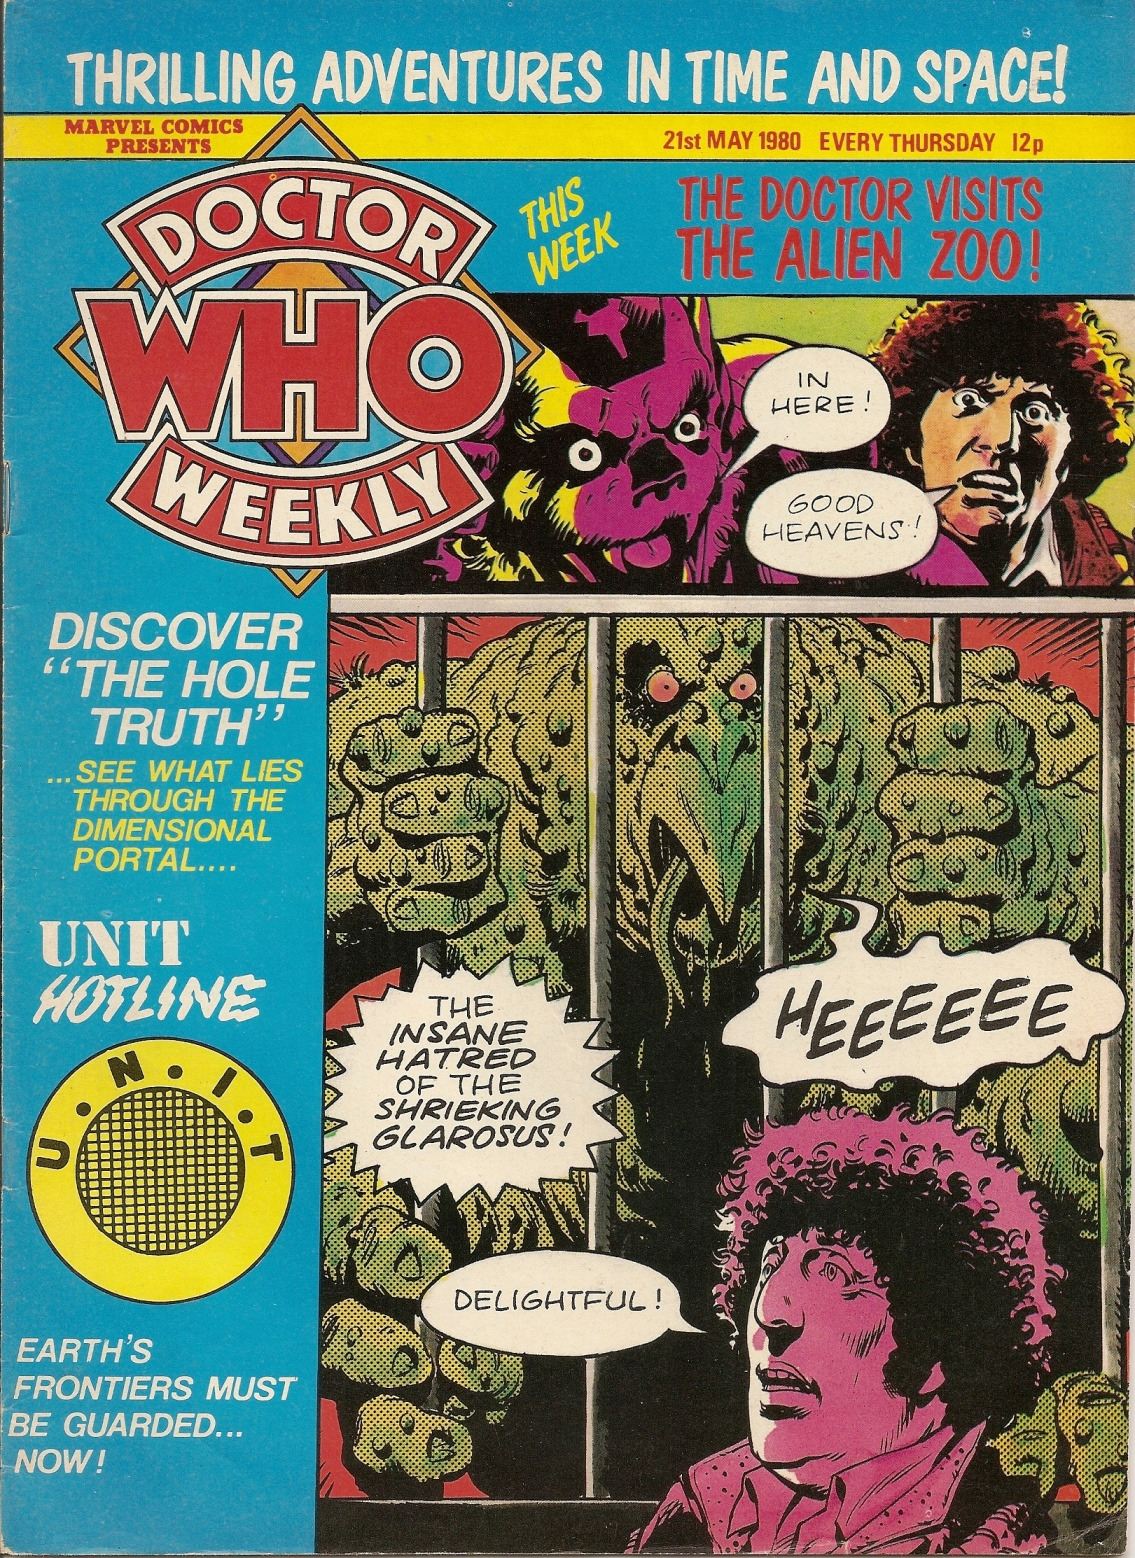 Doctor Who Weekly - Issue 32 - 21st May 1980